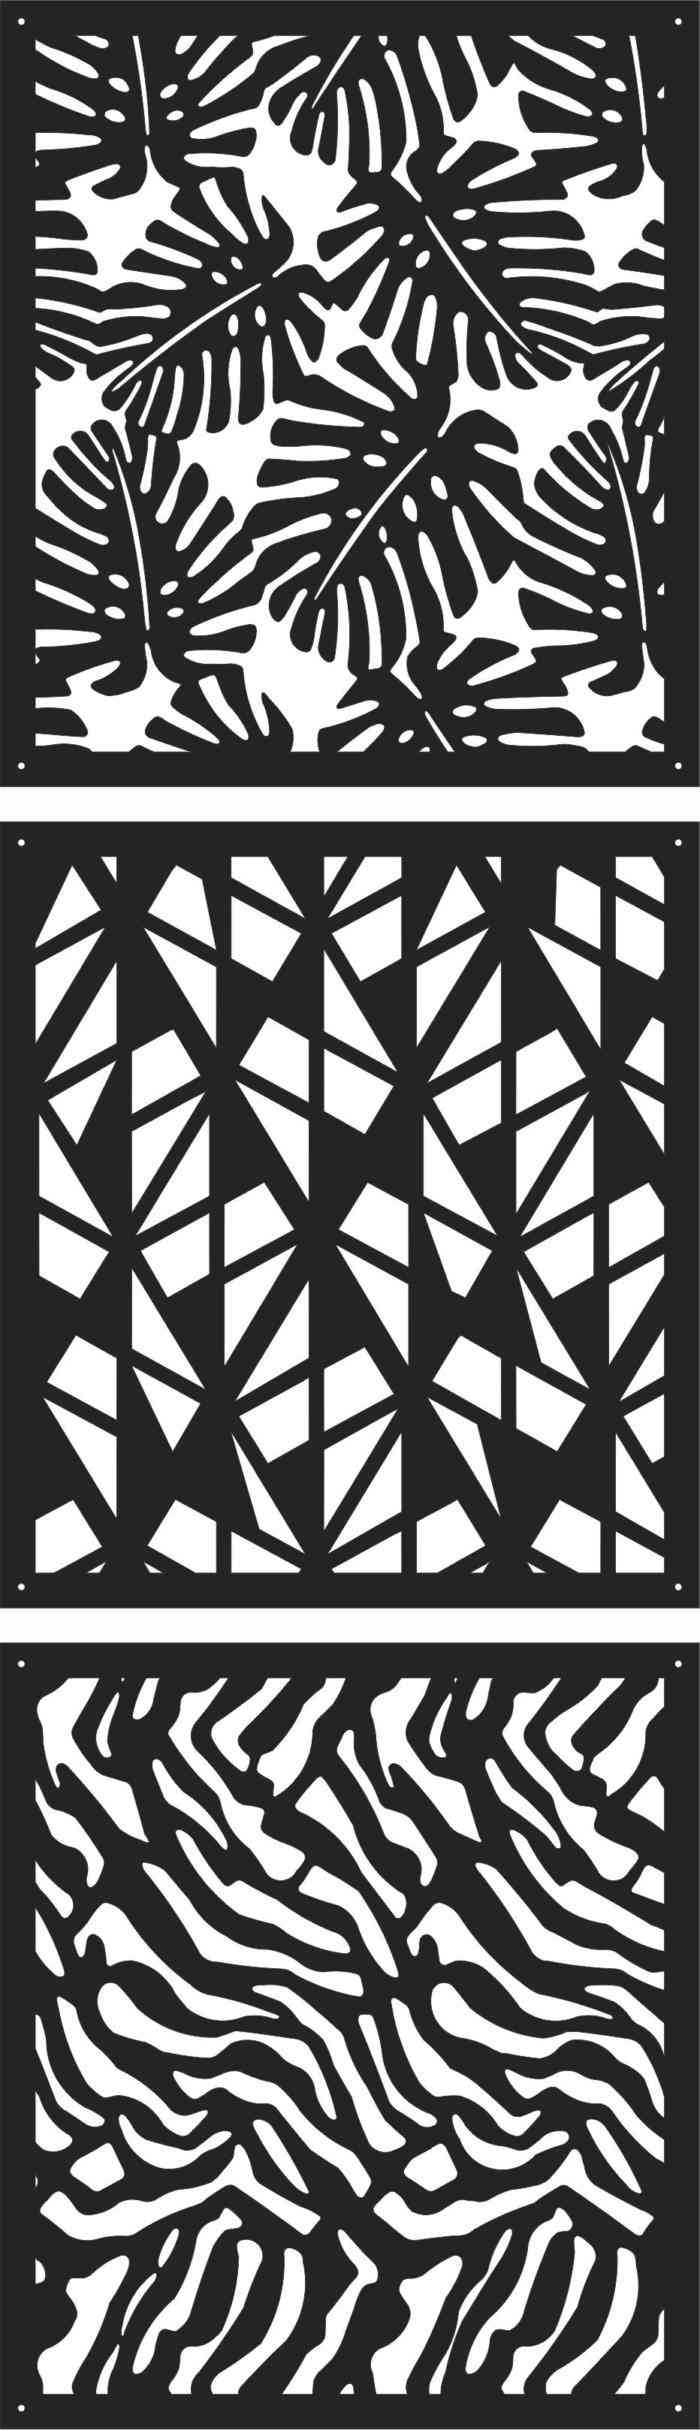 Decorative Screen Patterns Collections Free CDR Vectors Art